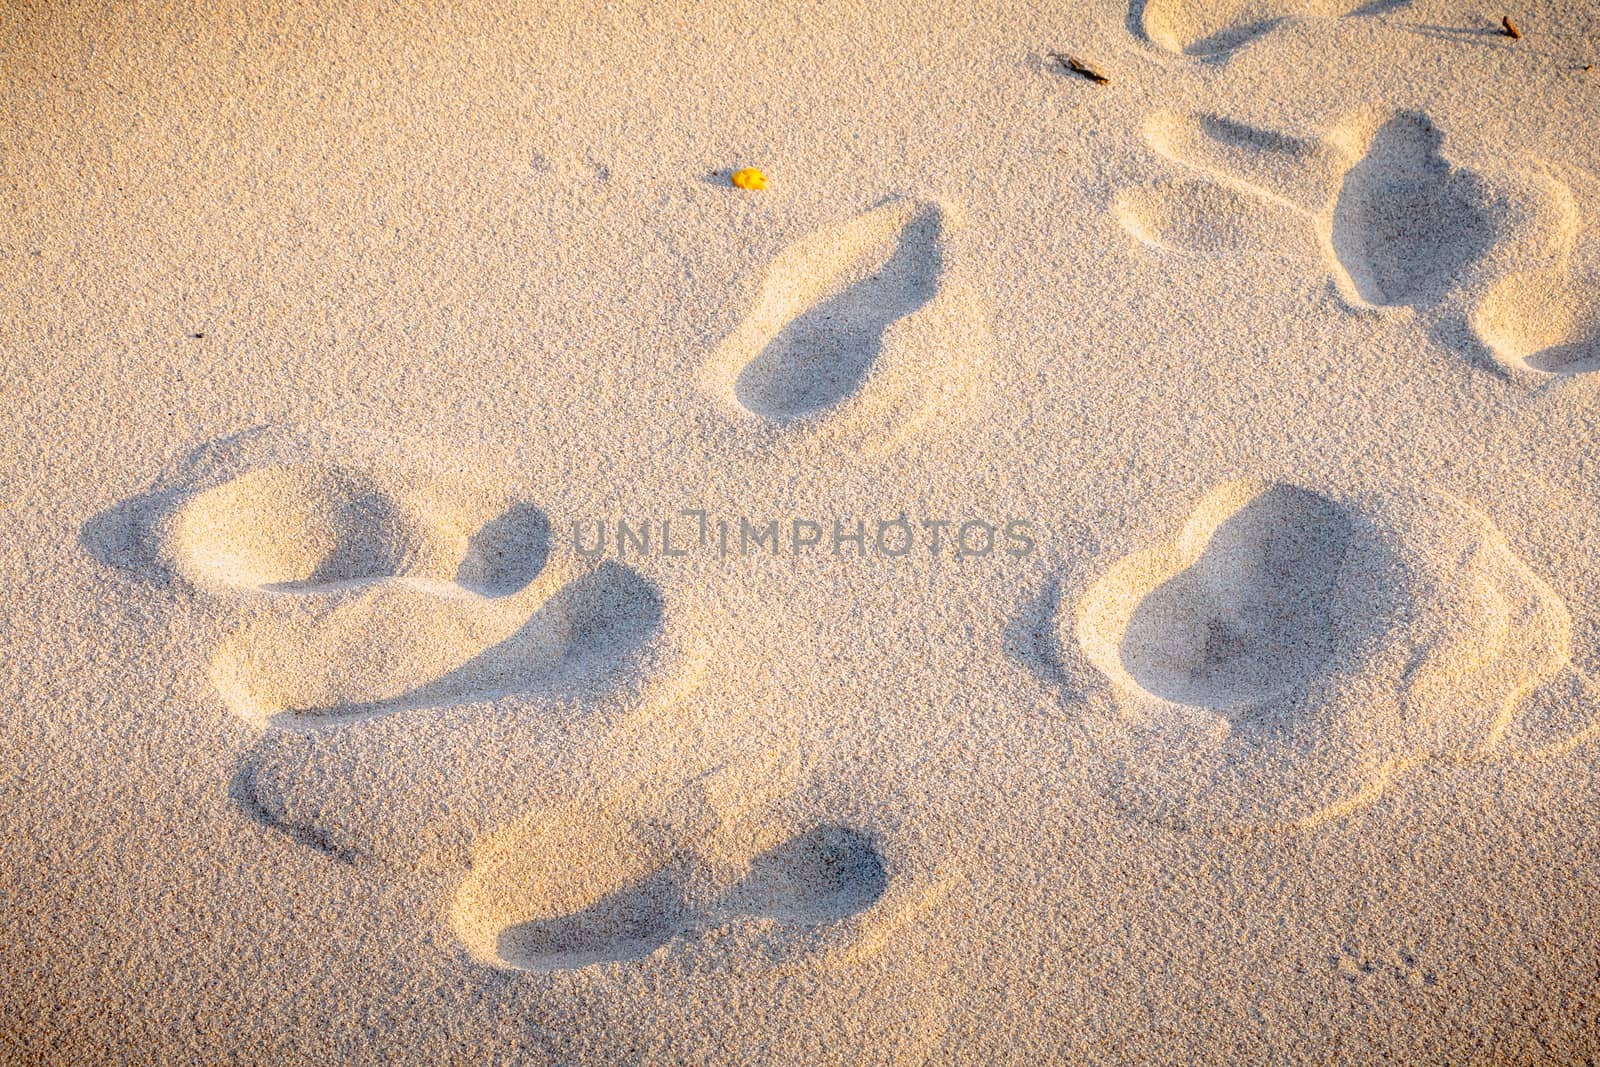 footprint in the fine sand by the sea by AtlanticEUROSTOXX